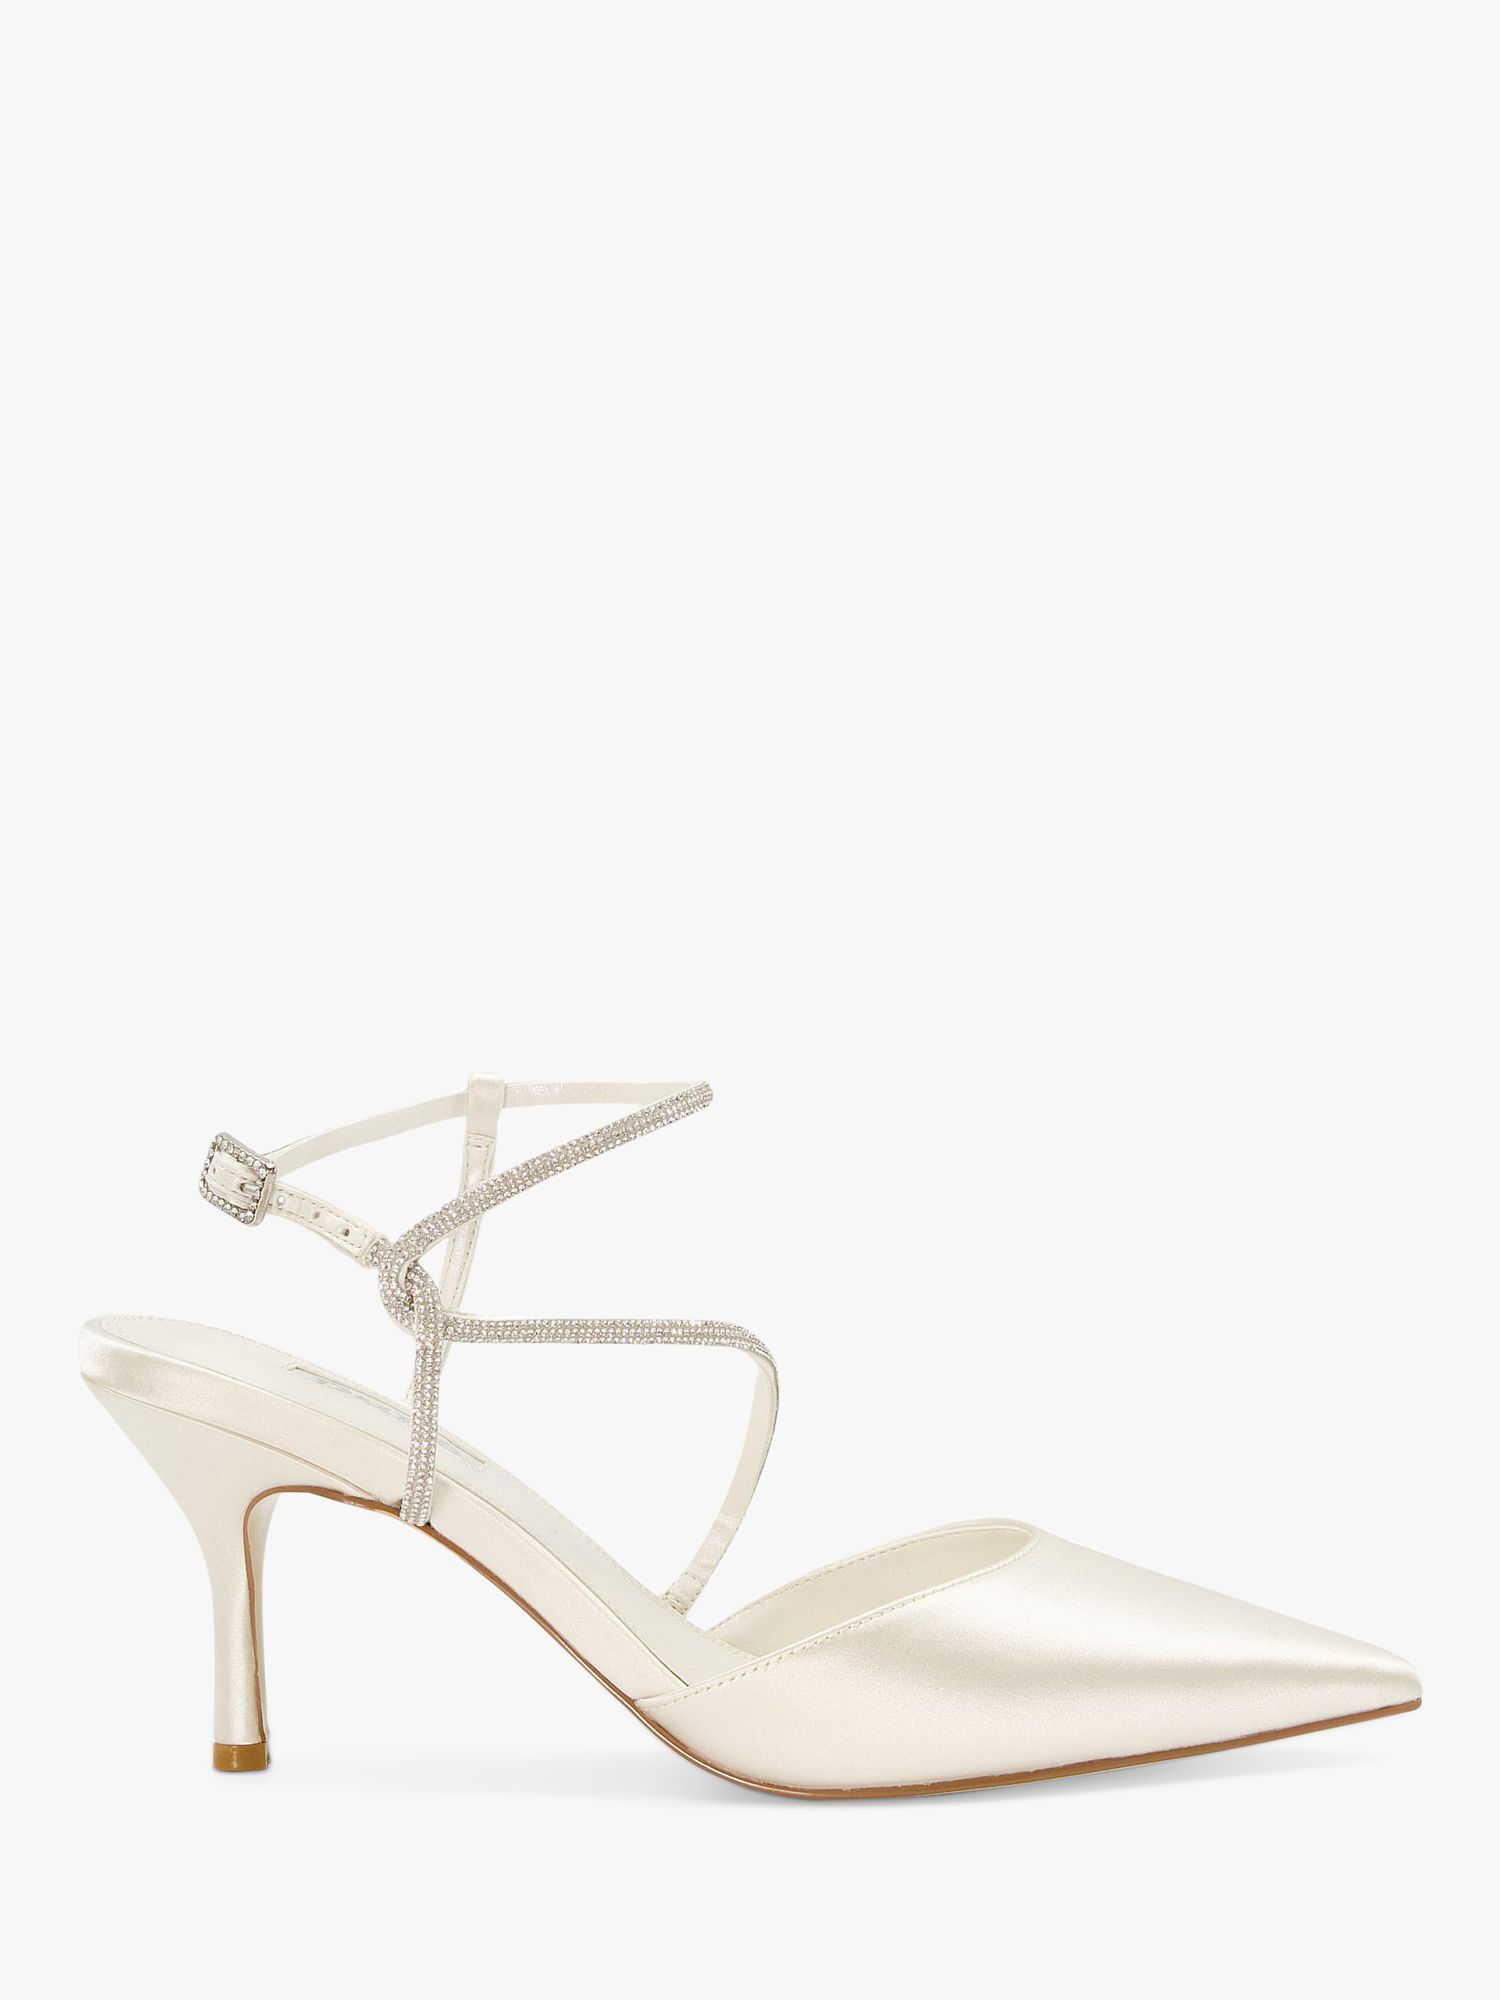 Dune Bridal Collection Clarrise Satin Court Shoes, Ivory